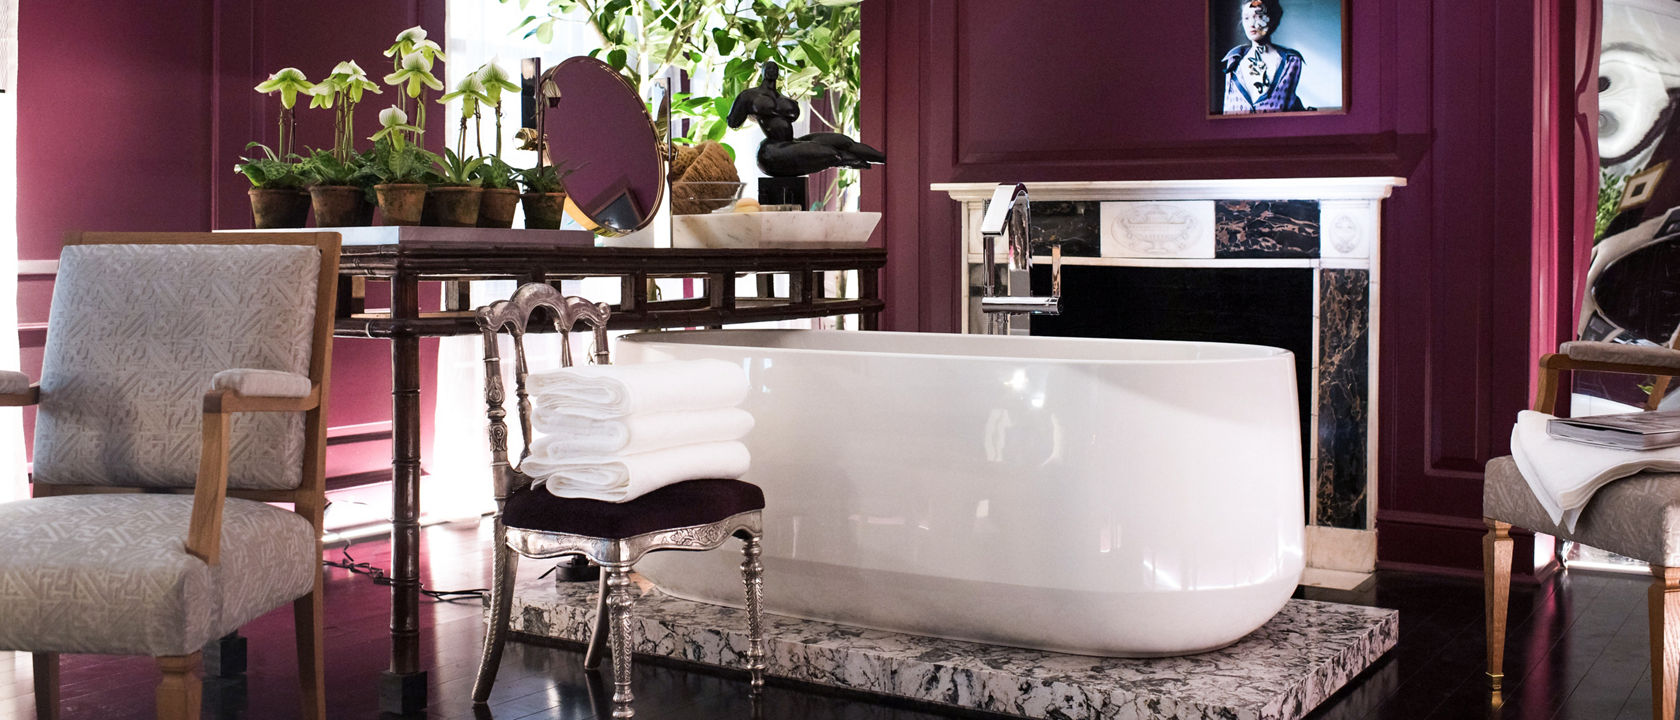 a luxurious bathroom with a white tub on tops of a quartz slab, wine red walls, elegant furniture, and lots of plants.